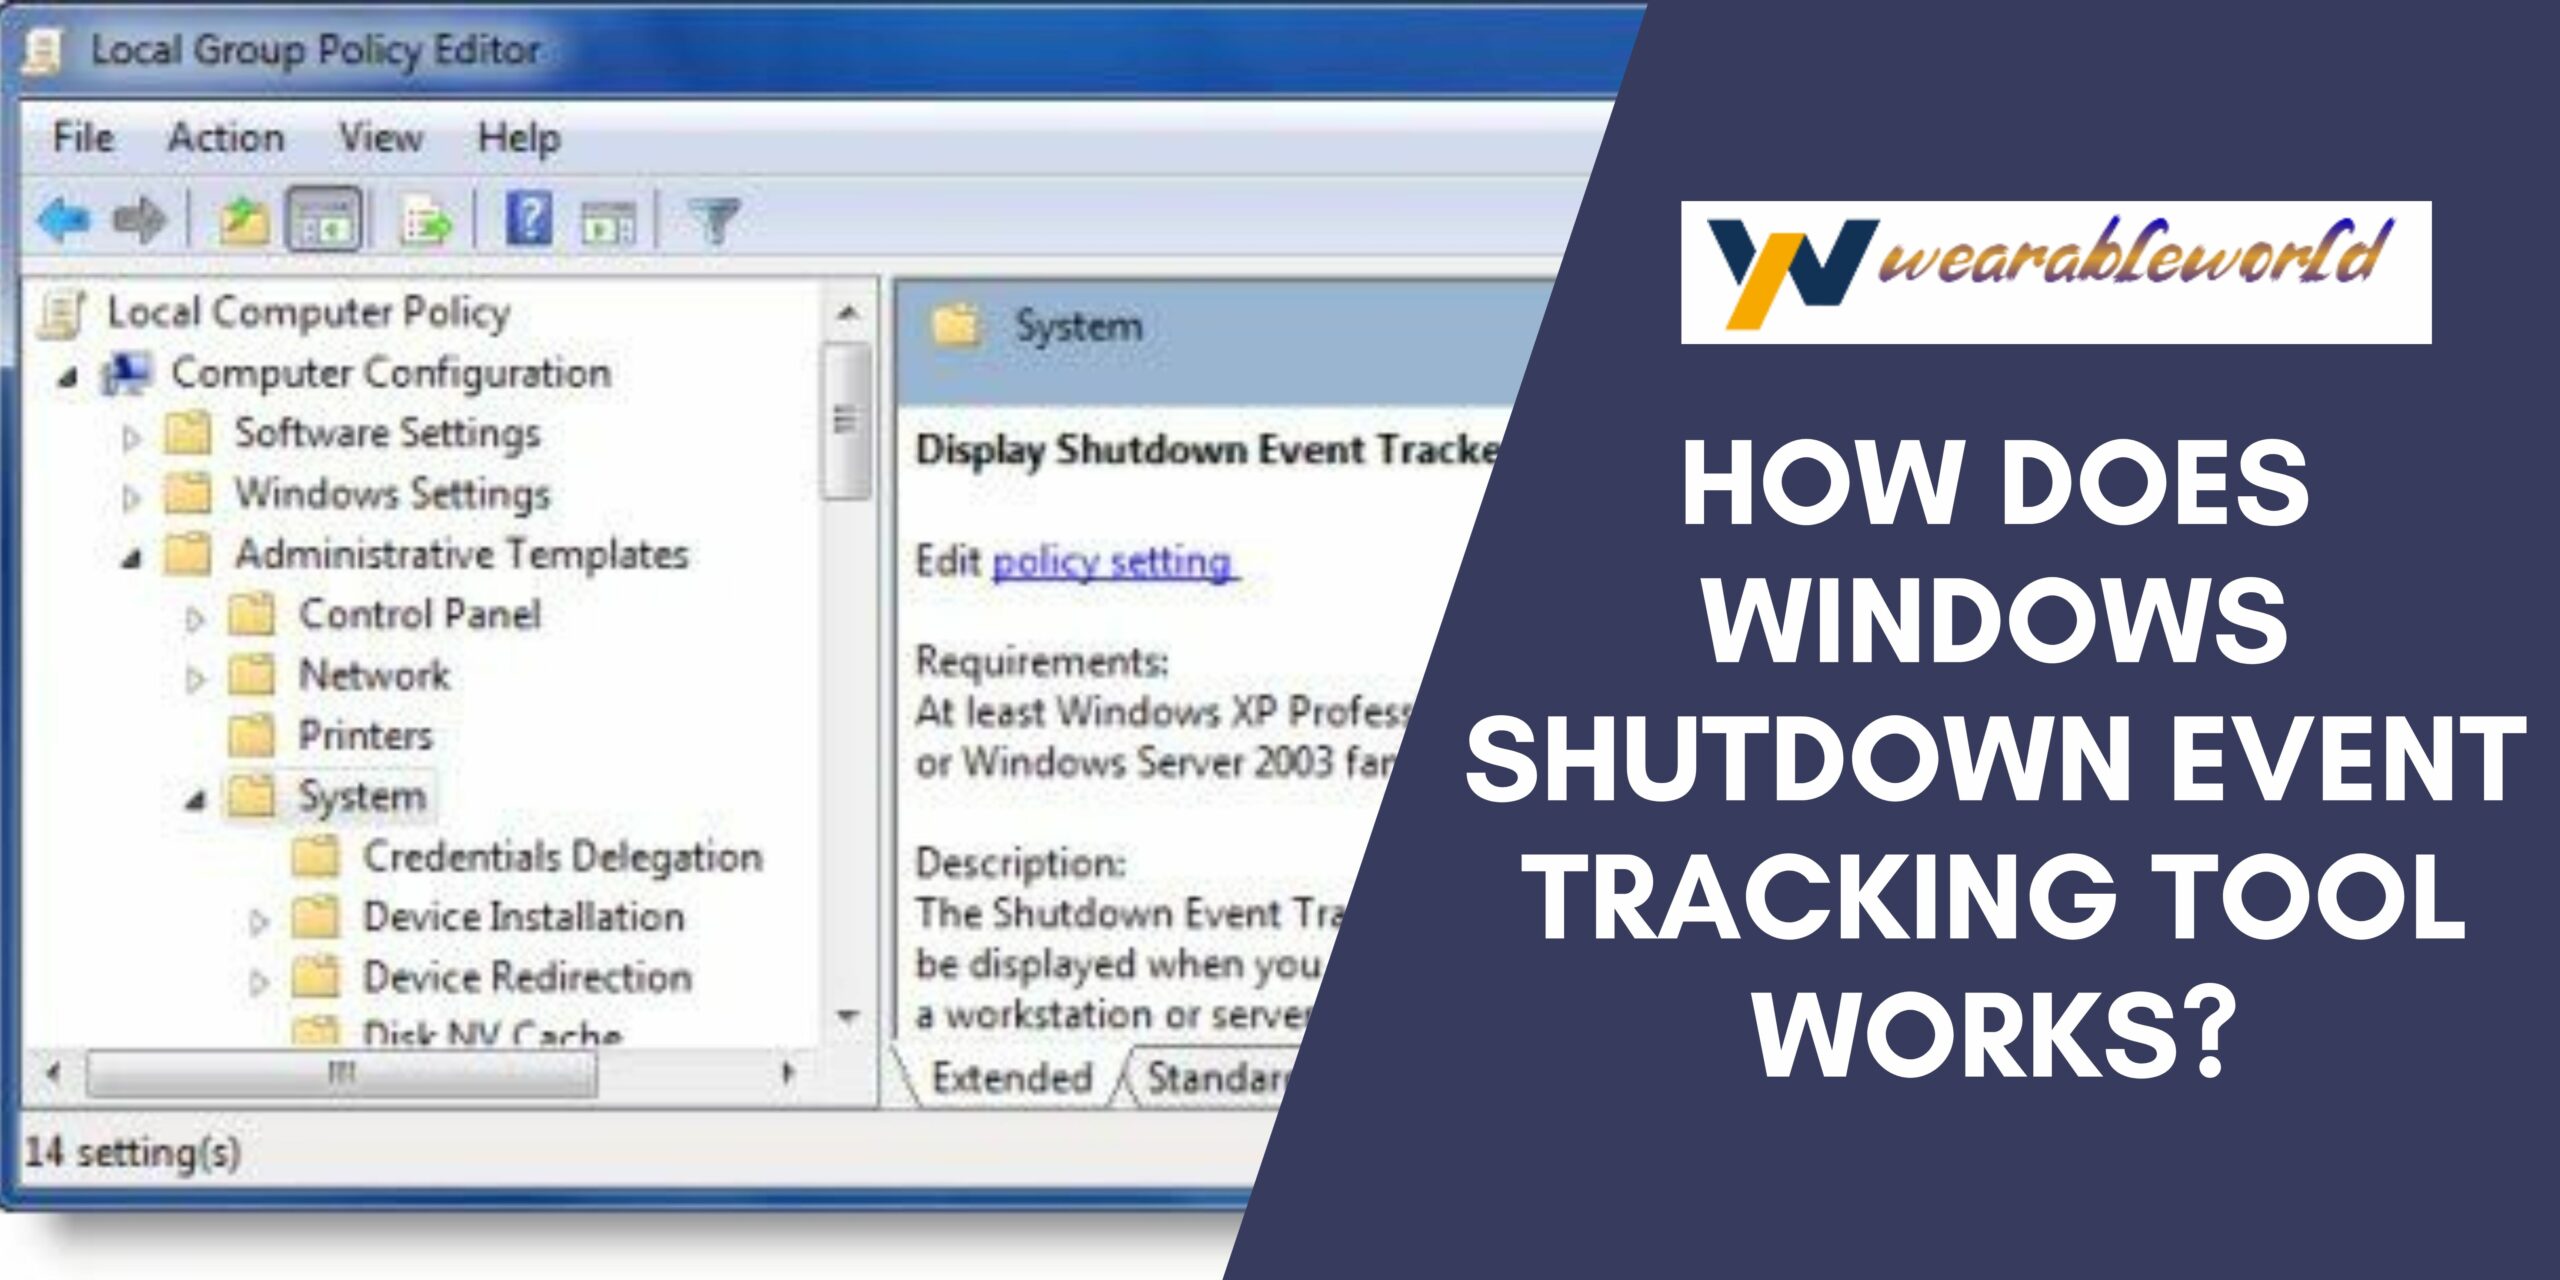 How Does Windows Shutdown Event Tracking Tool Works?